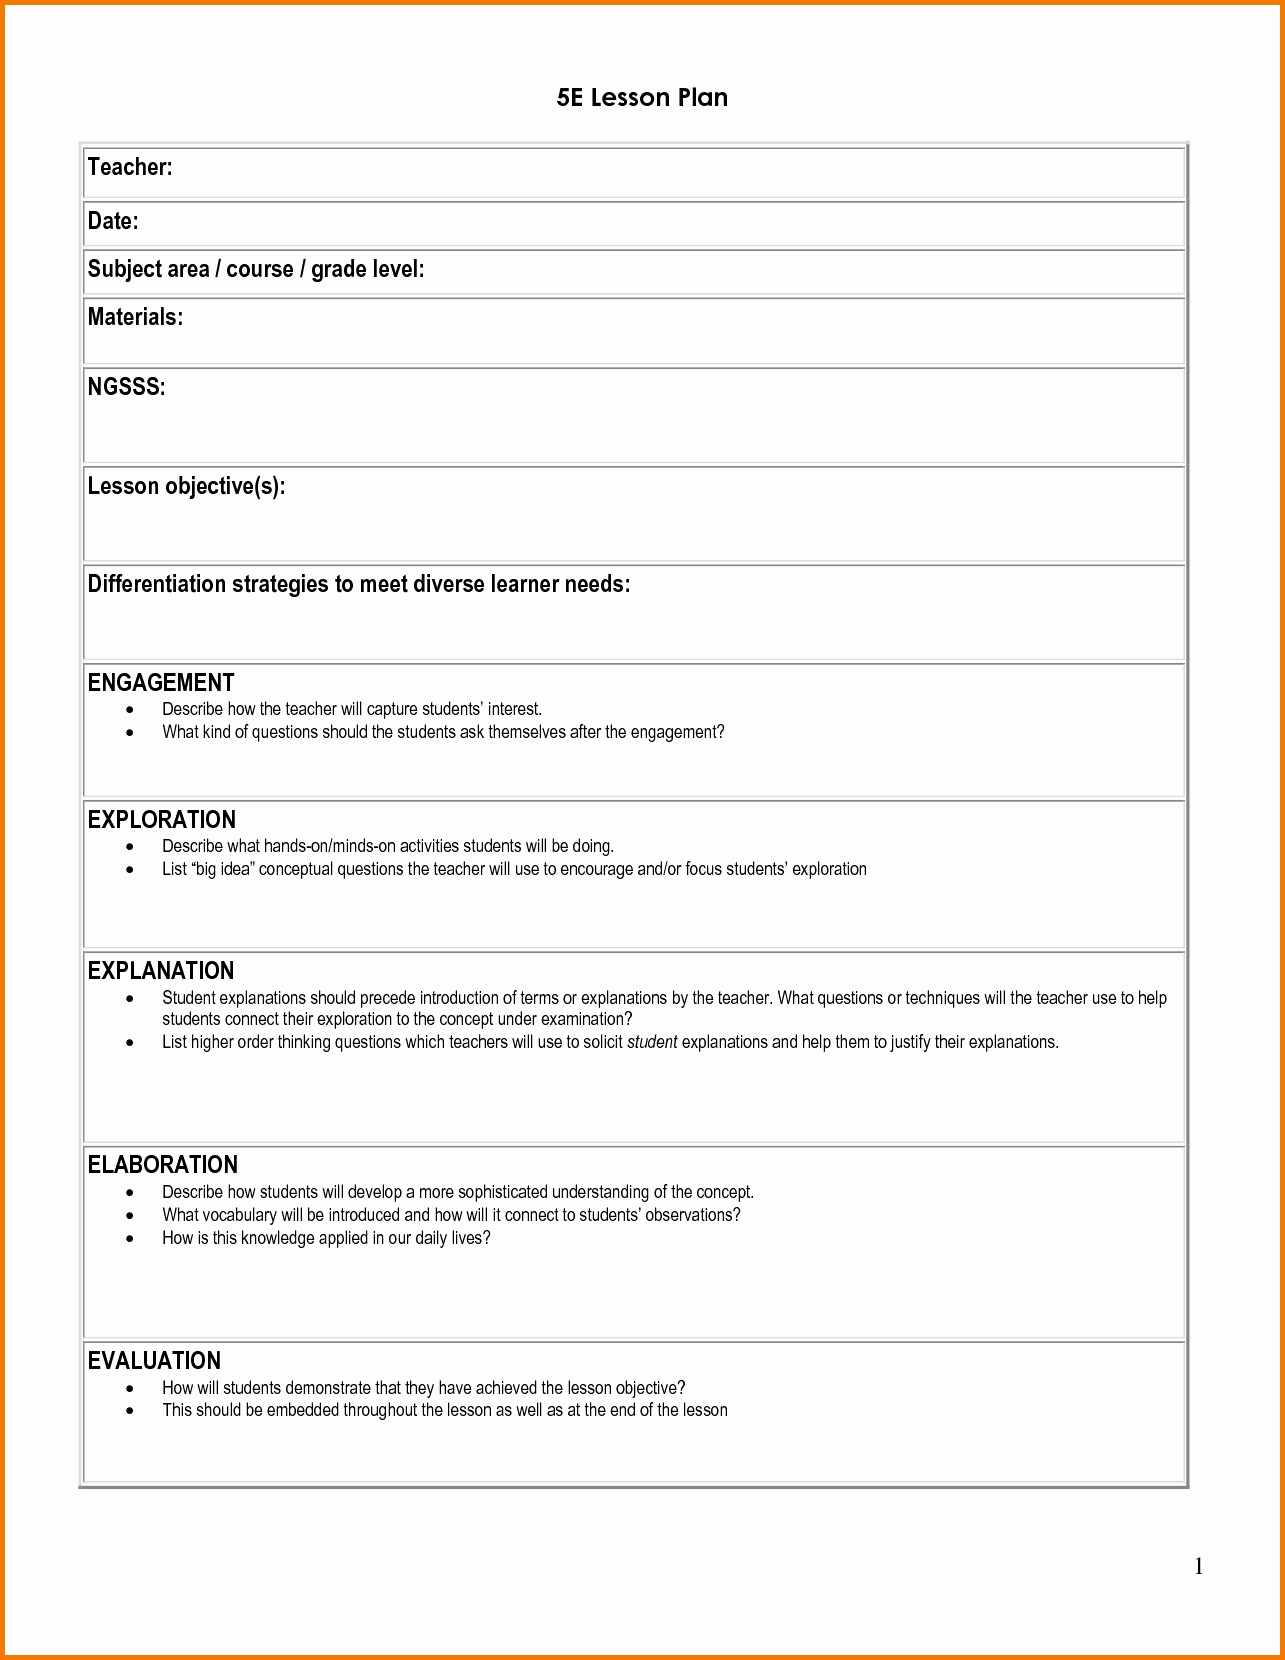 Wmels Lesson Plan Template Inspirational Wmels Lesson Plan Template – 2017 Group Youngstar